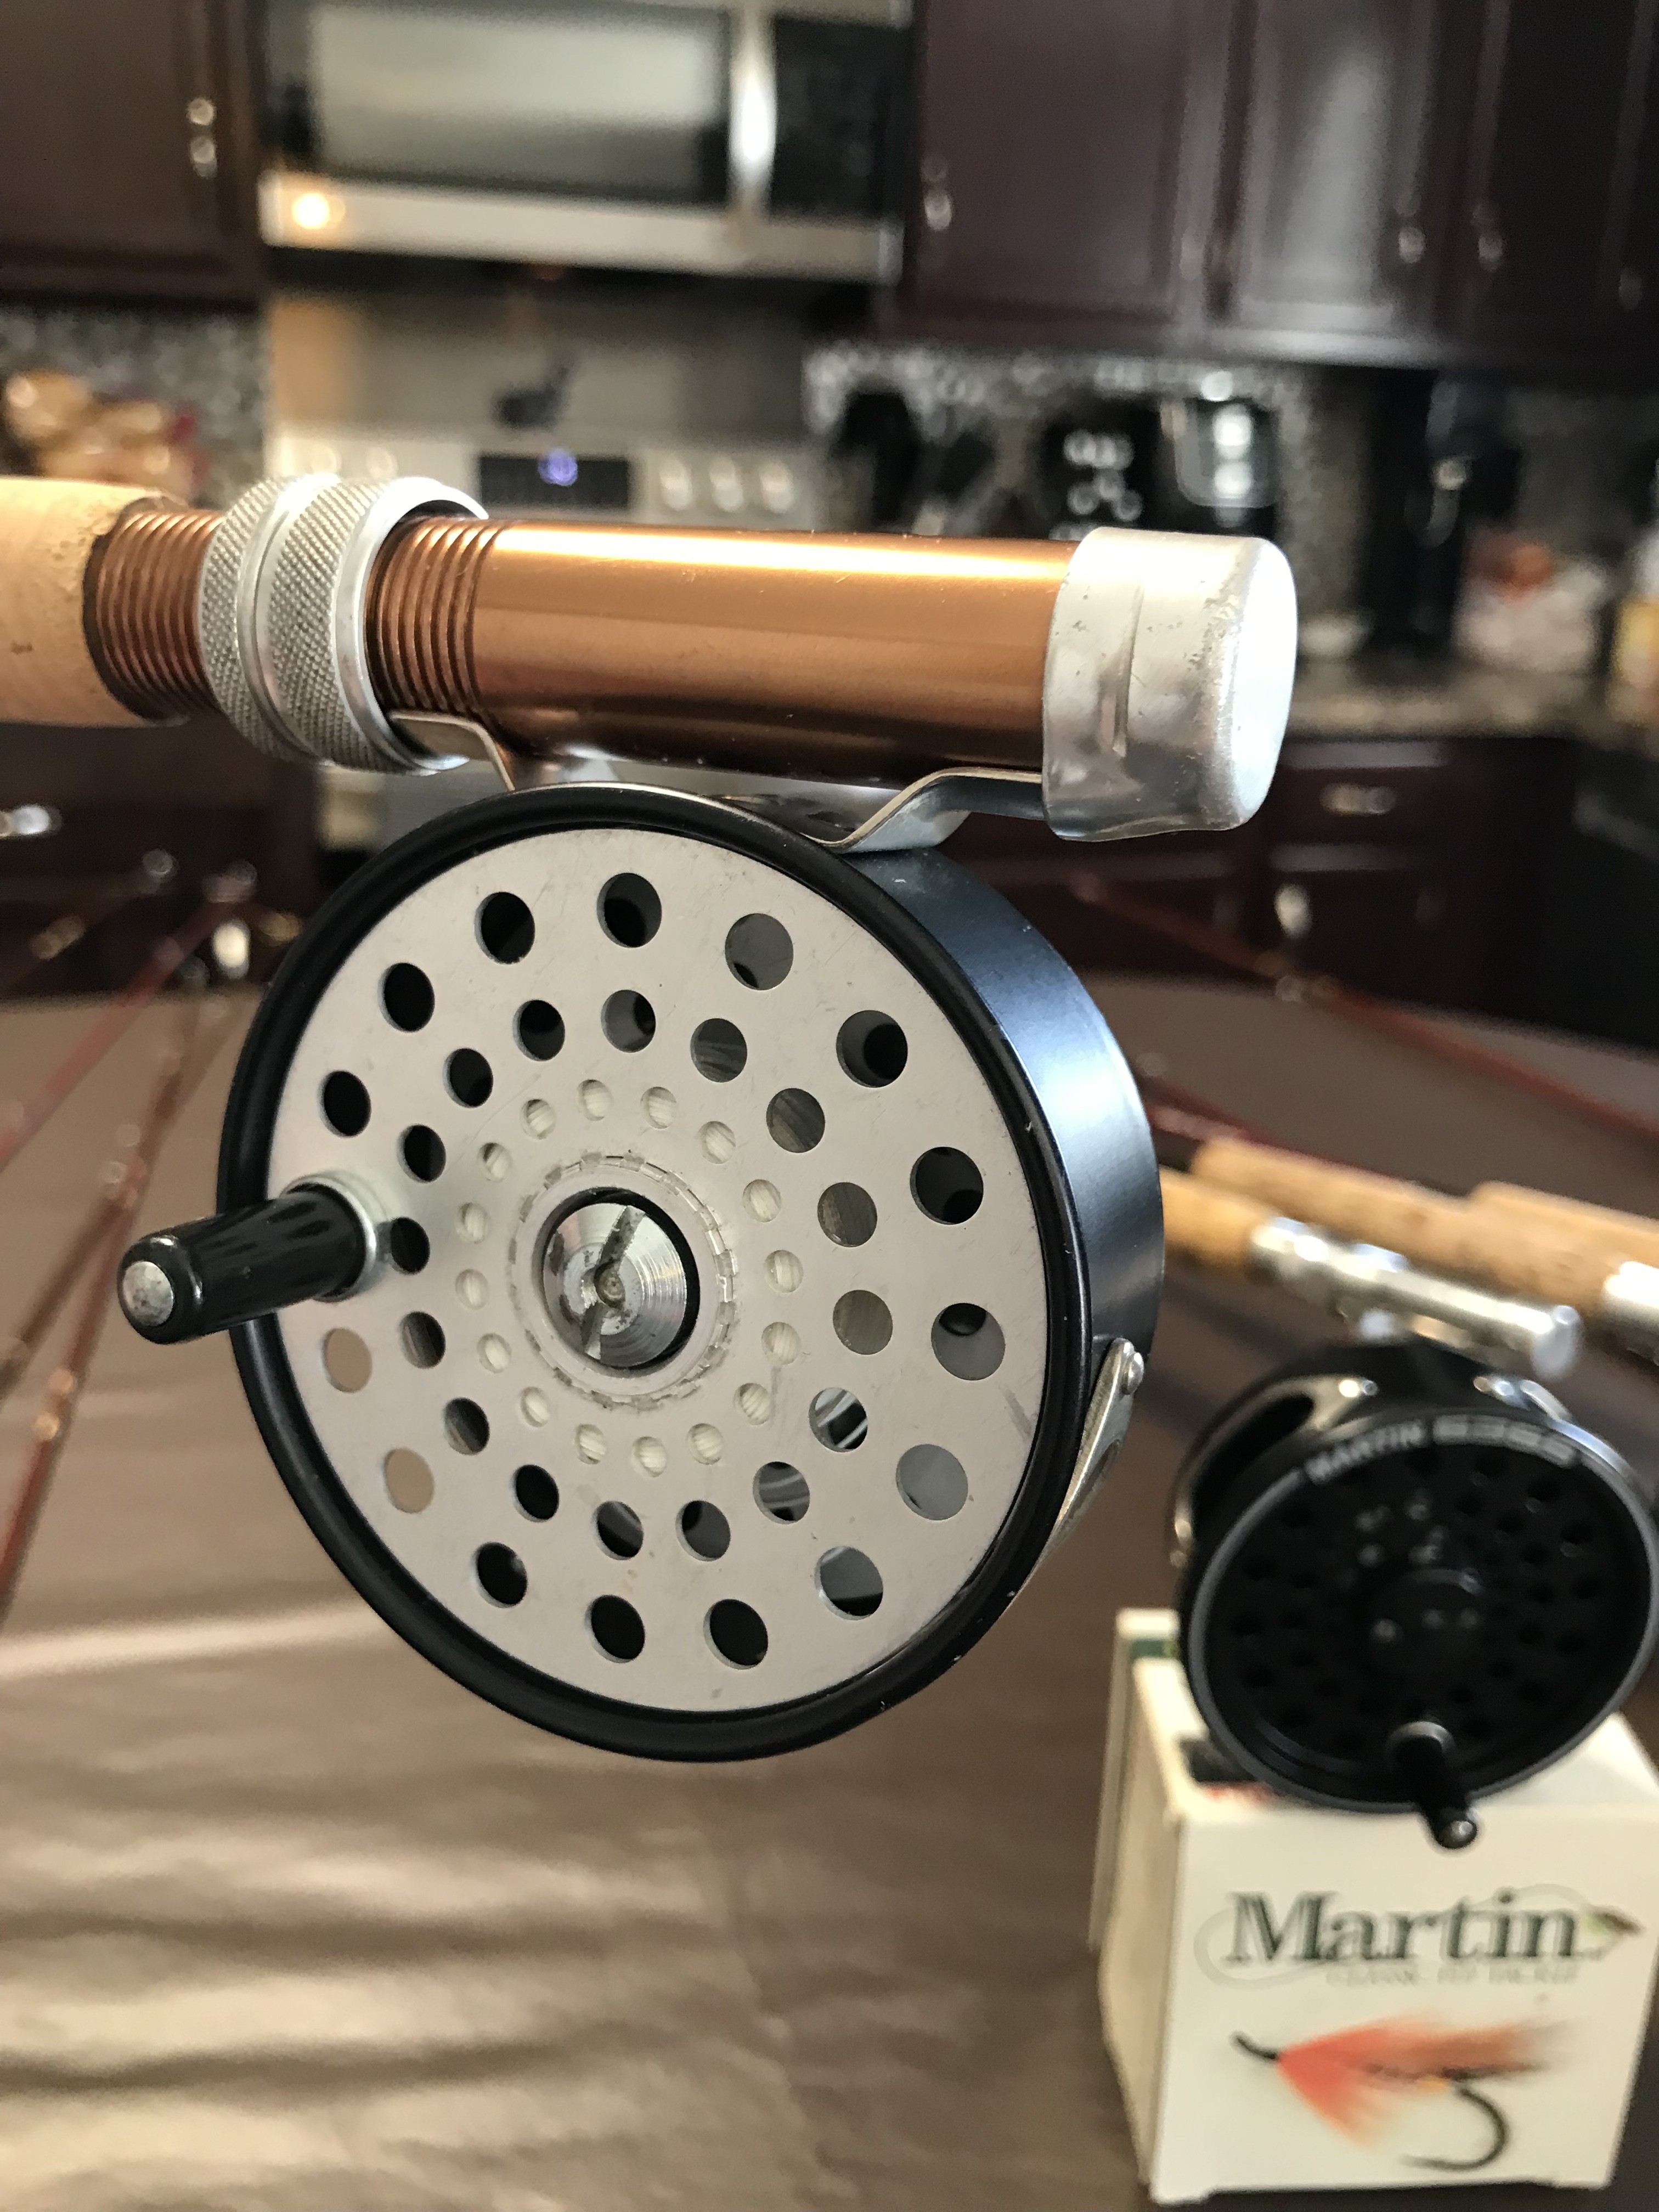 Eagle Claw fly fishing rod - 7ft. Gear box. Reel. - general for